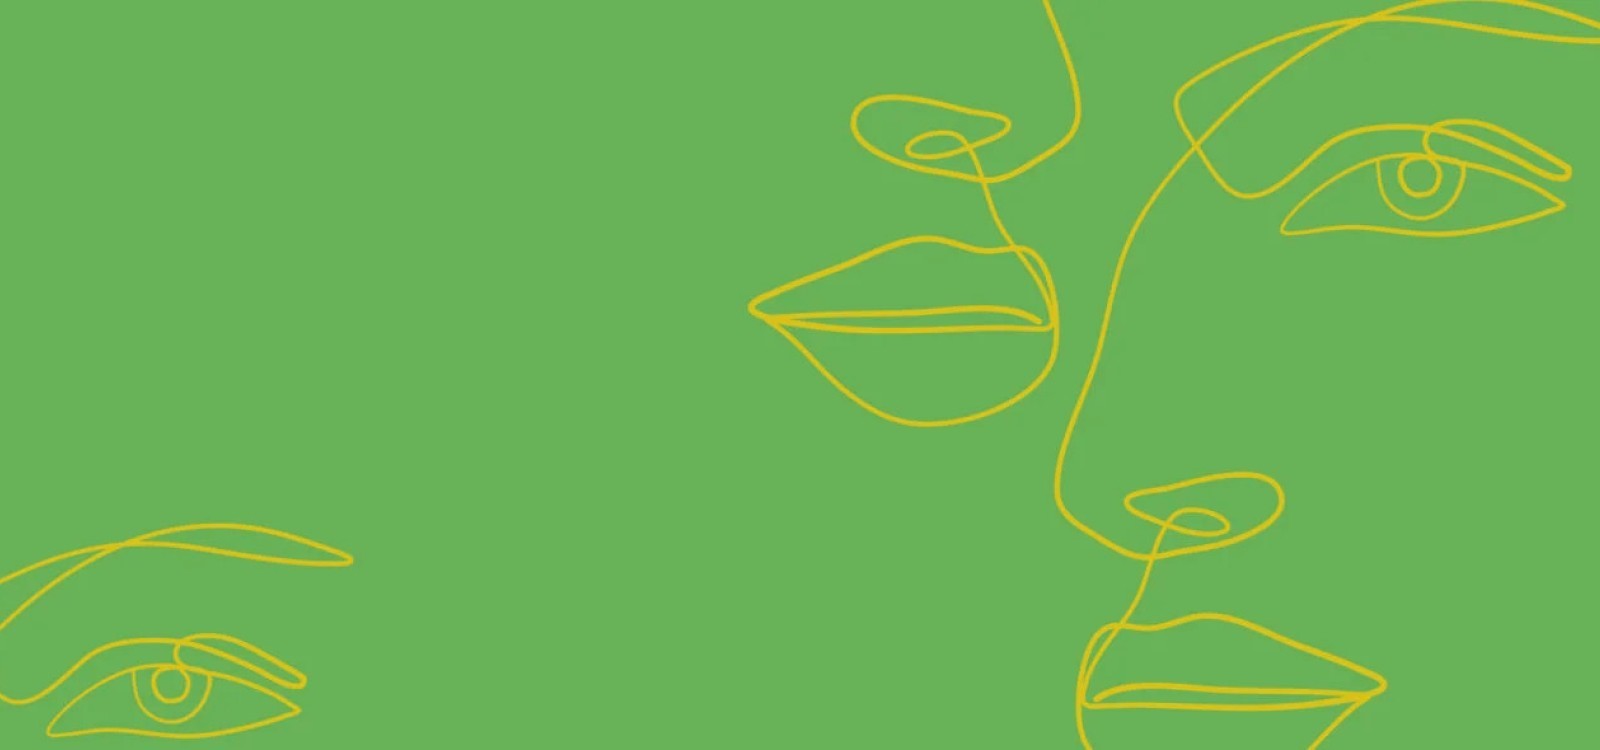 Art x Science Dialogue cover image: a green background with a fine line drawing of a face